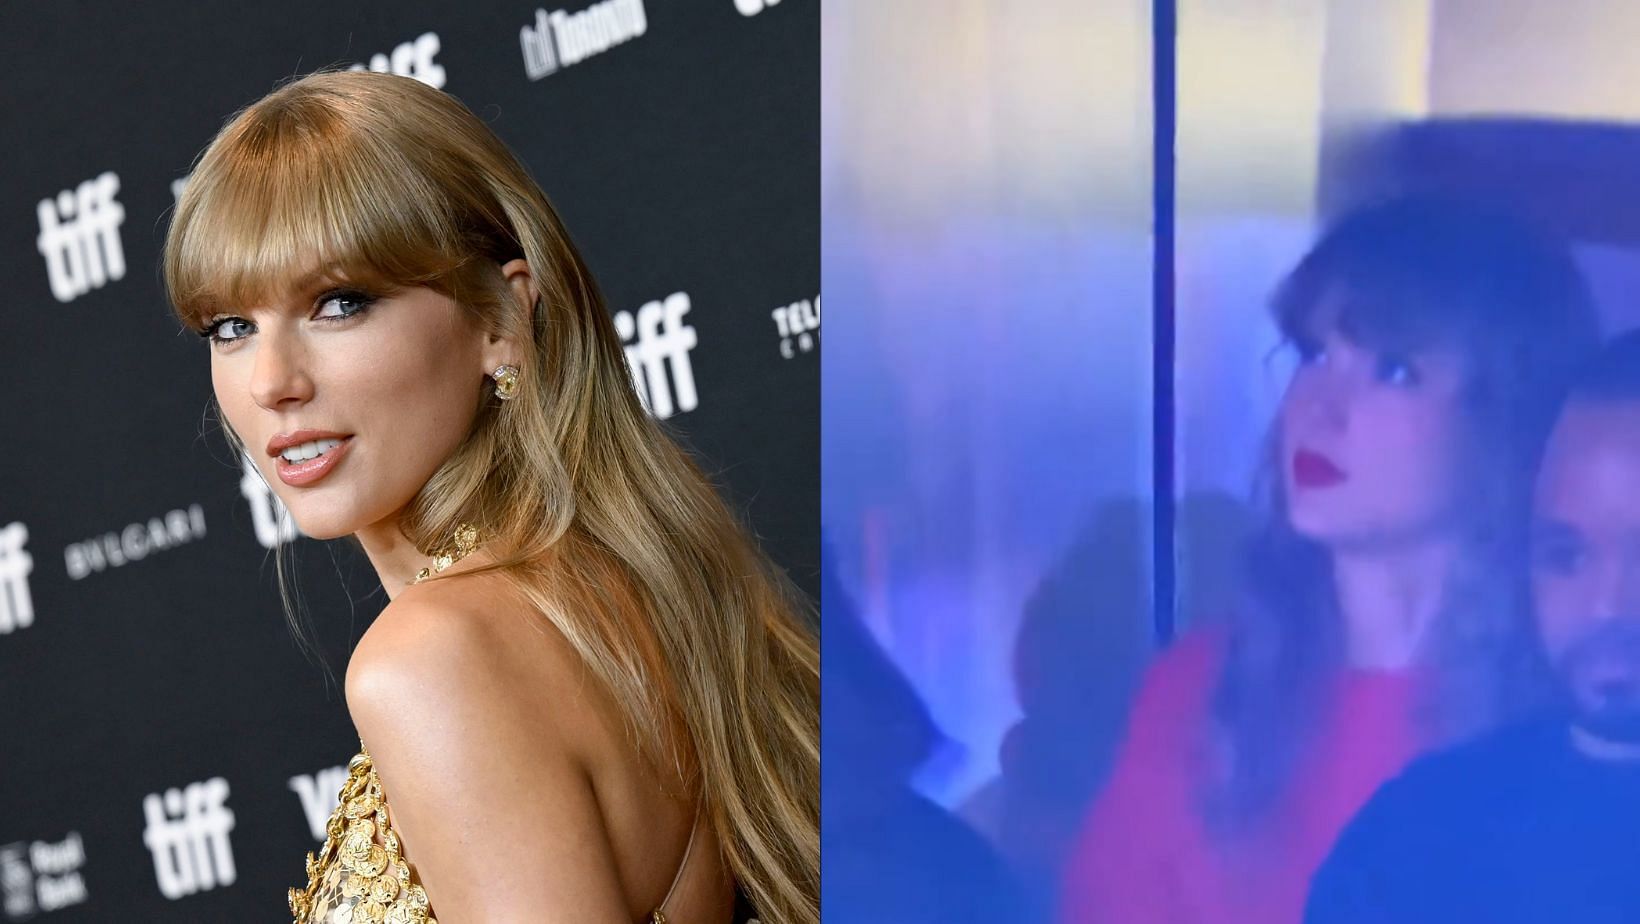 Did Taylor Swift told the cameras to go away?